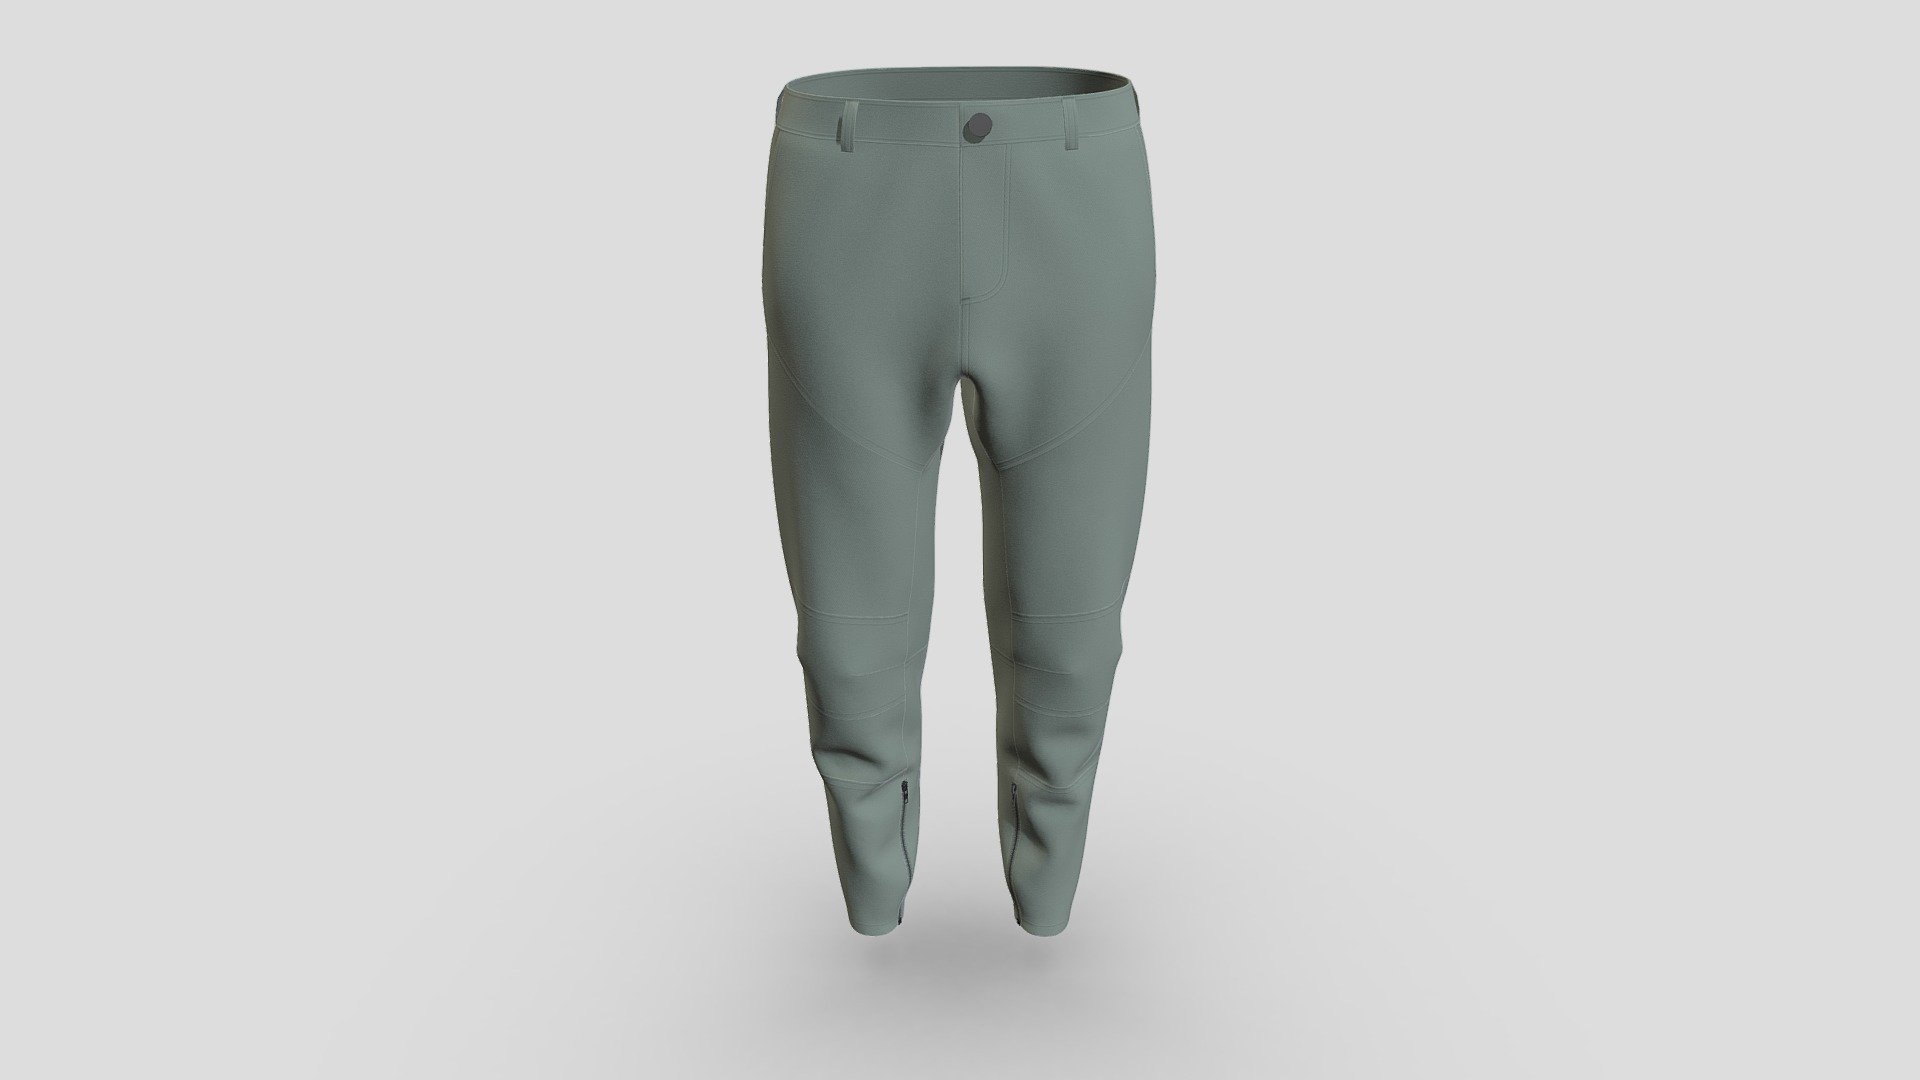 Cloth Title = Sporty Fashionable Pant Design  

SKU = DG100083 

Category = Men 

Product Type = Pant 

Cloth Length = Long 

Body Fit = Regular Fit 

Occasion = Casual  

Waist Rise = Mid Rise 


Our Services:

3D Apparel Design.

OBJ,FBX,GLTF Making with High/Low Poly.

Fabric Digitalization.

Mockup making.

3D Teck Pack.

Pattern Making.

2D Illustration.

Cloth Animation and 360 Spin Video.


Contact us:- 

Email: info@digitalfashionwear.com 

Website: https://digitalfashionwear.com 

WhatsApp No: +8801759350445 


We designed all the types of cloth specially focused on product visualization, e-commerce, fitting, and production. 

We will design: 

T-shirts 

Polo shirts 

Hoodies 

Sweatshirt 

Jackets 

Shirts 

TankTops 

Trousers 

Bras 

Underwear 

Blazer 

Aprons 

Leggings 

and All Fashion items. 





Our goal is to make sure what we provide you, meets your demand 3d model